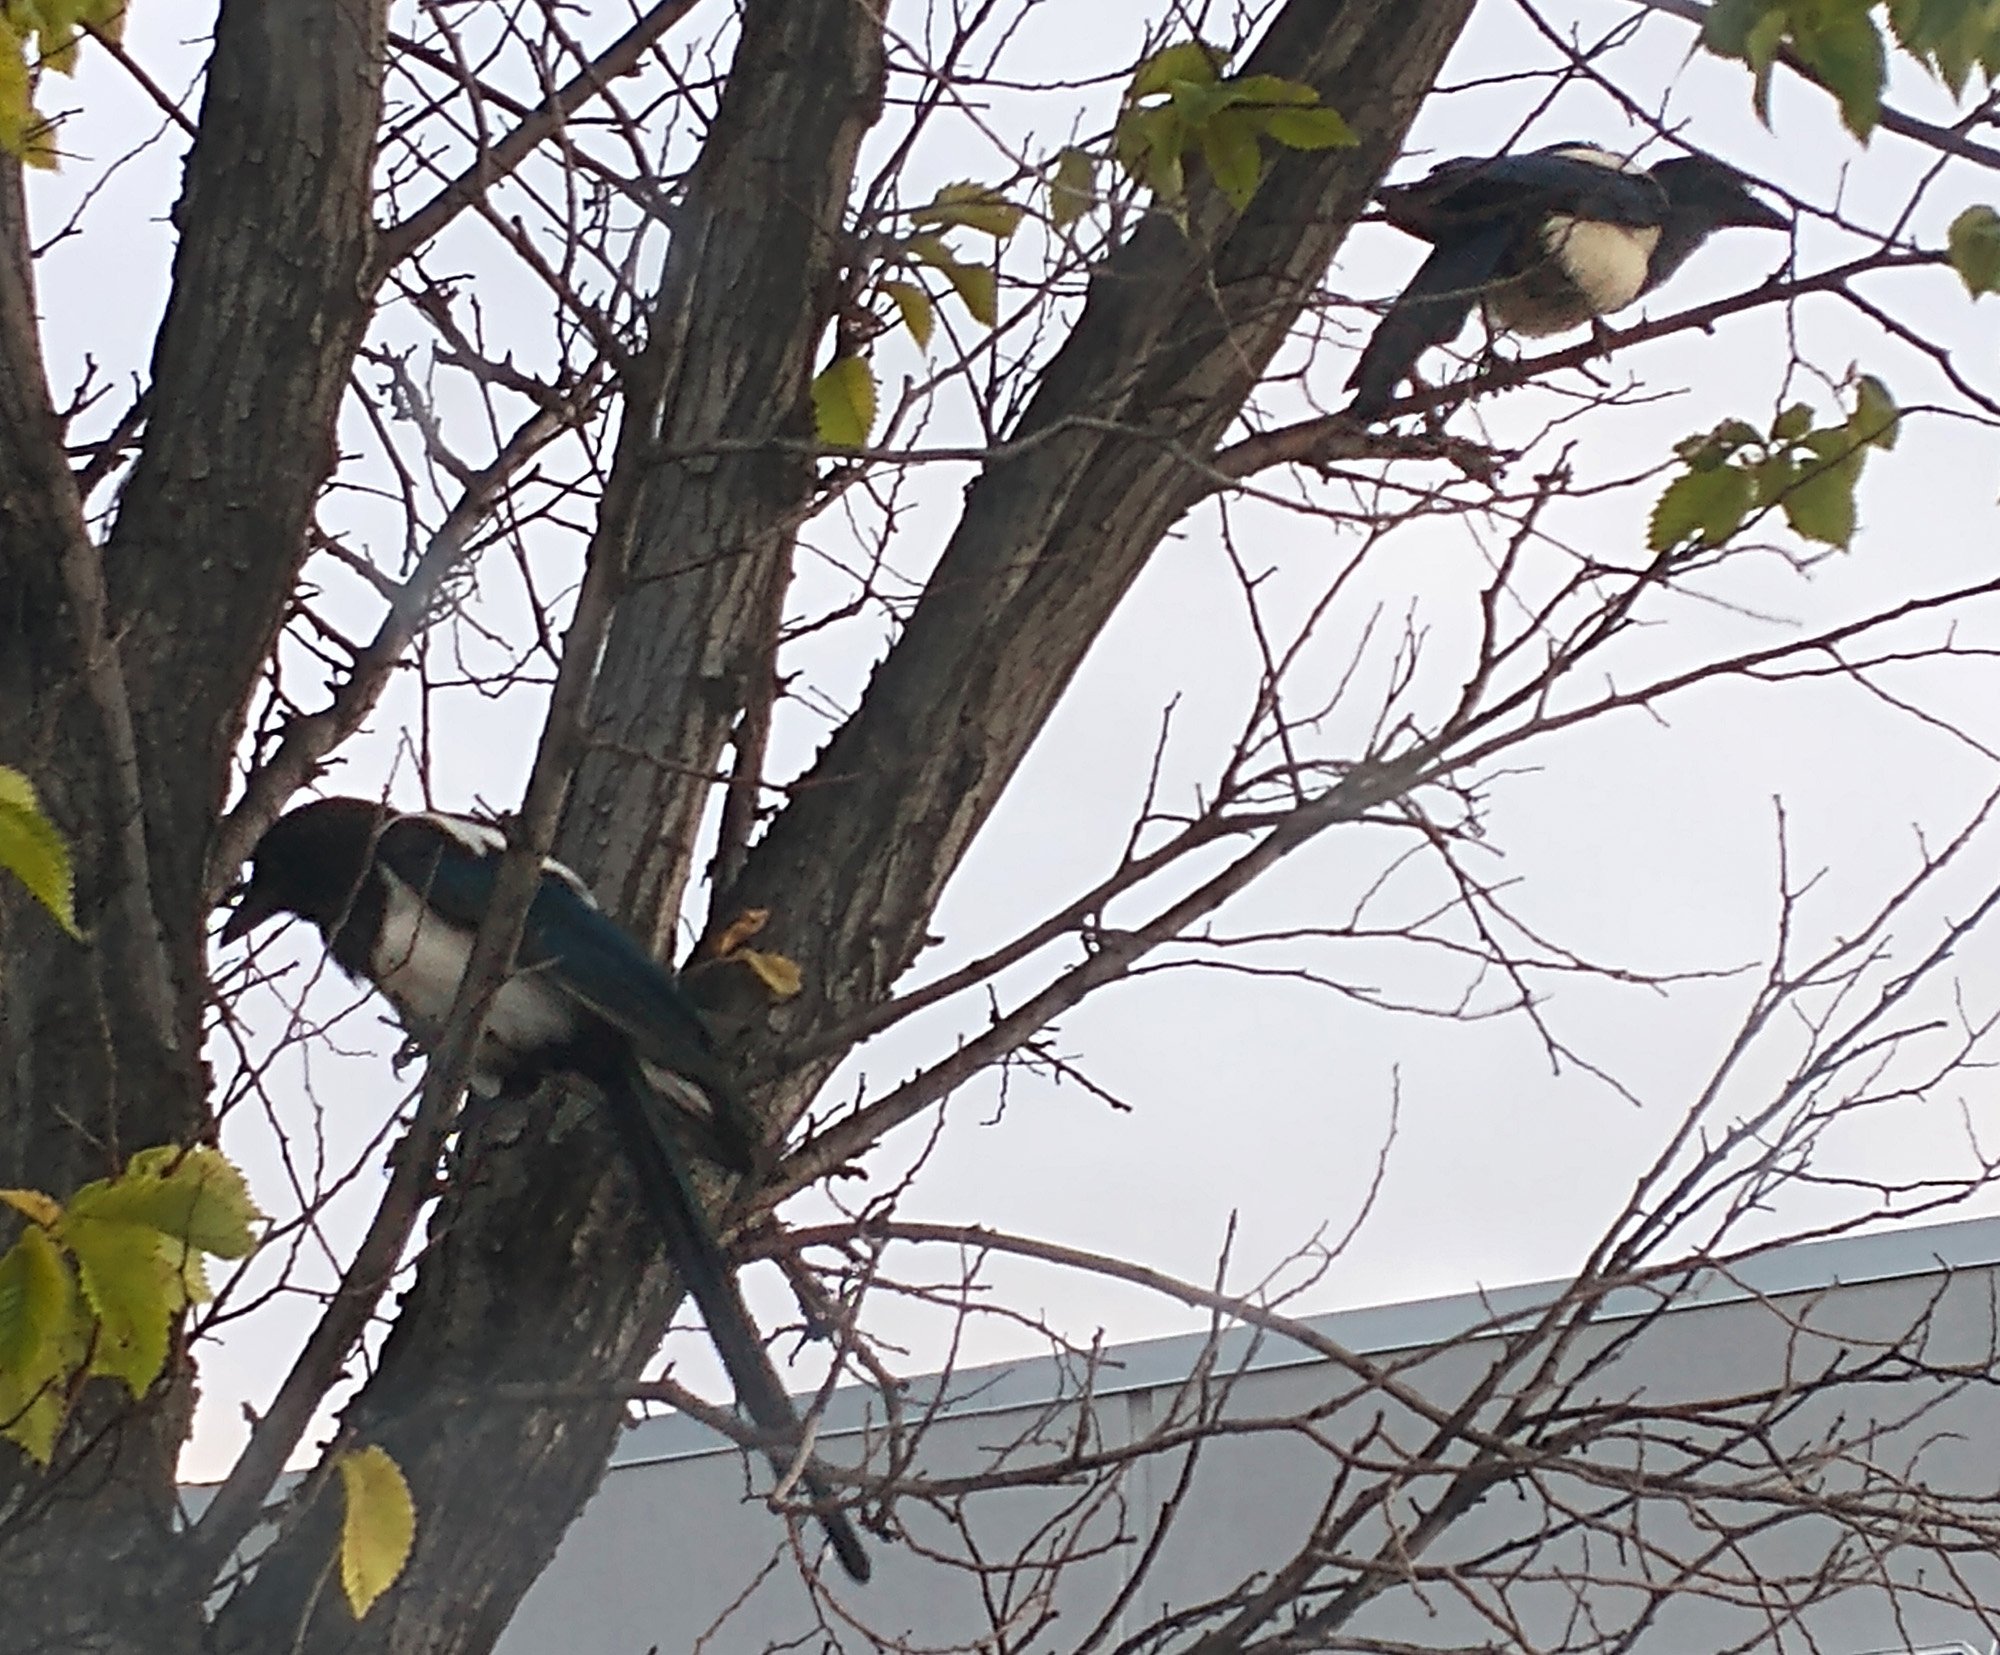 Turns out it was half a dozen magpies eating the crushed bugs on my front bumper! They're all over the parking lot doing the same thing with other cars. Recycling.